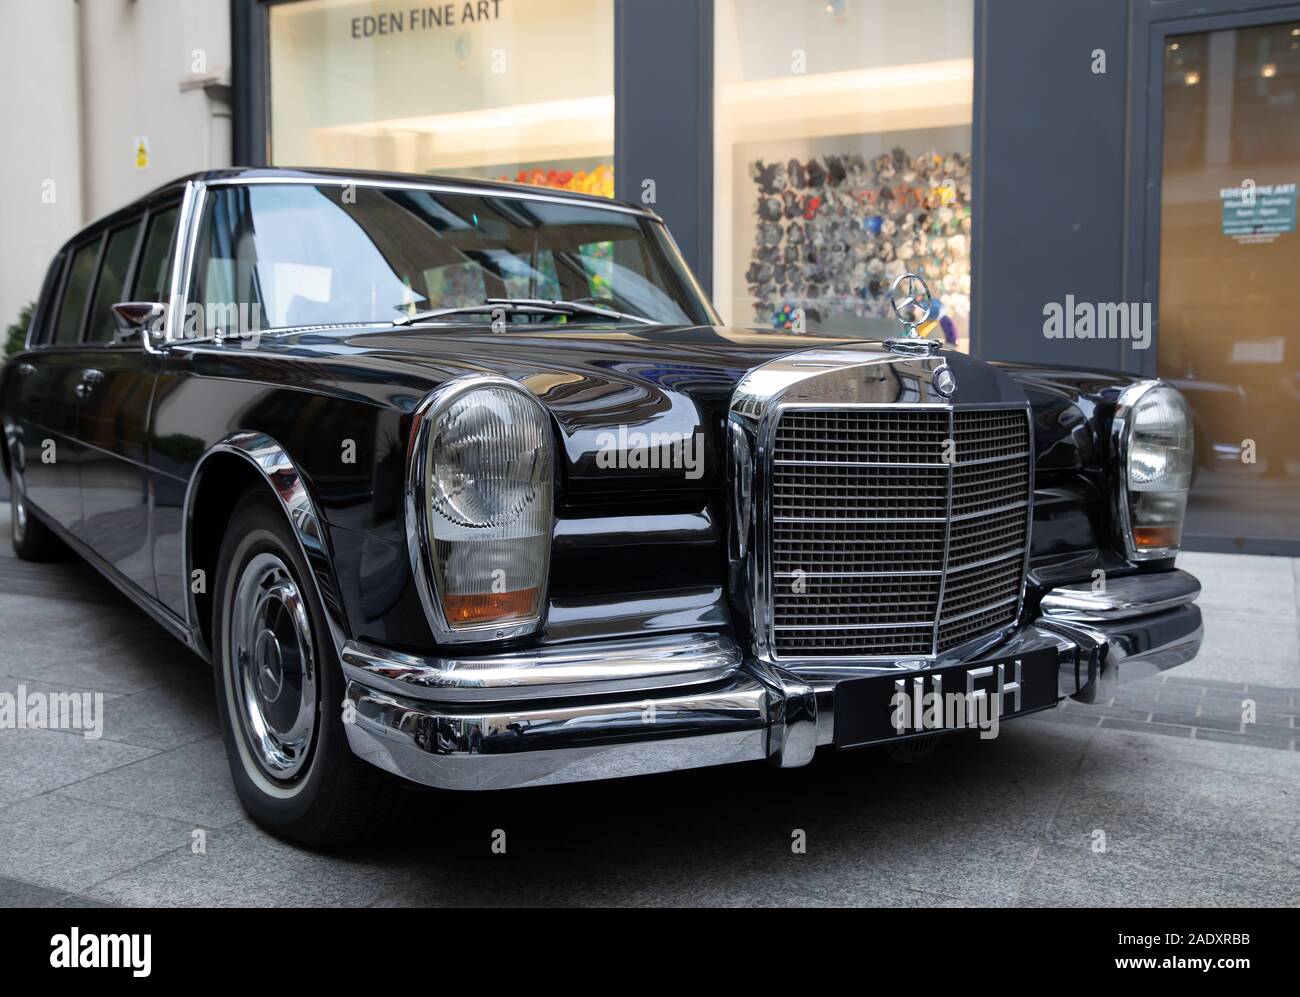 London, UK. 5th Dec, 2019. A photocall took place at Bonhams New Bond Street for their Fine Collectors Motor car sale. 1965 Mercedes-Benz 600 Pullman Saloon. Estimated at £300,000-£500,000. The sale of 35 historic and modern collectors cars takes place on Saturday 7th December at 2.30pm. Credit: Keith Larby/Alamy Live News Stock Photo